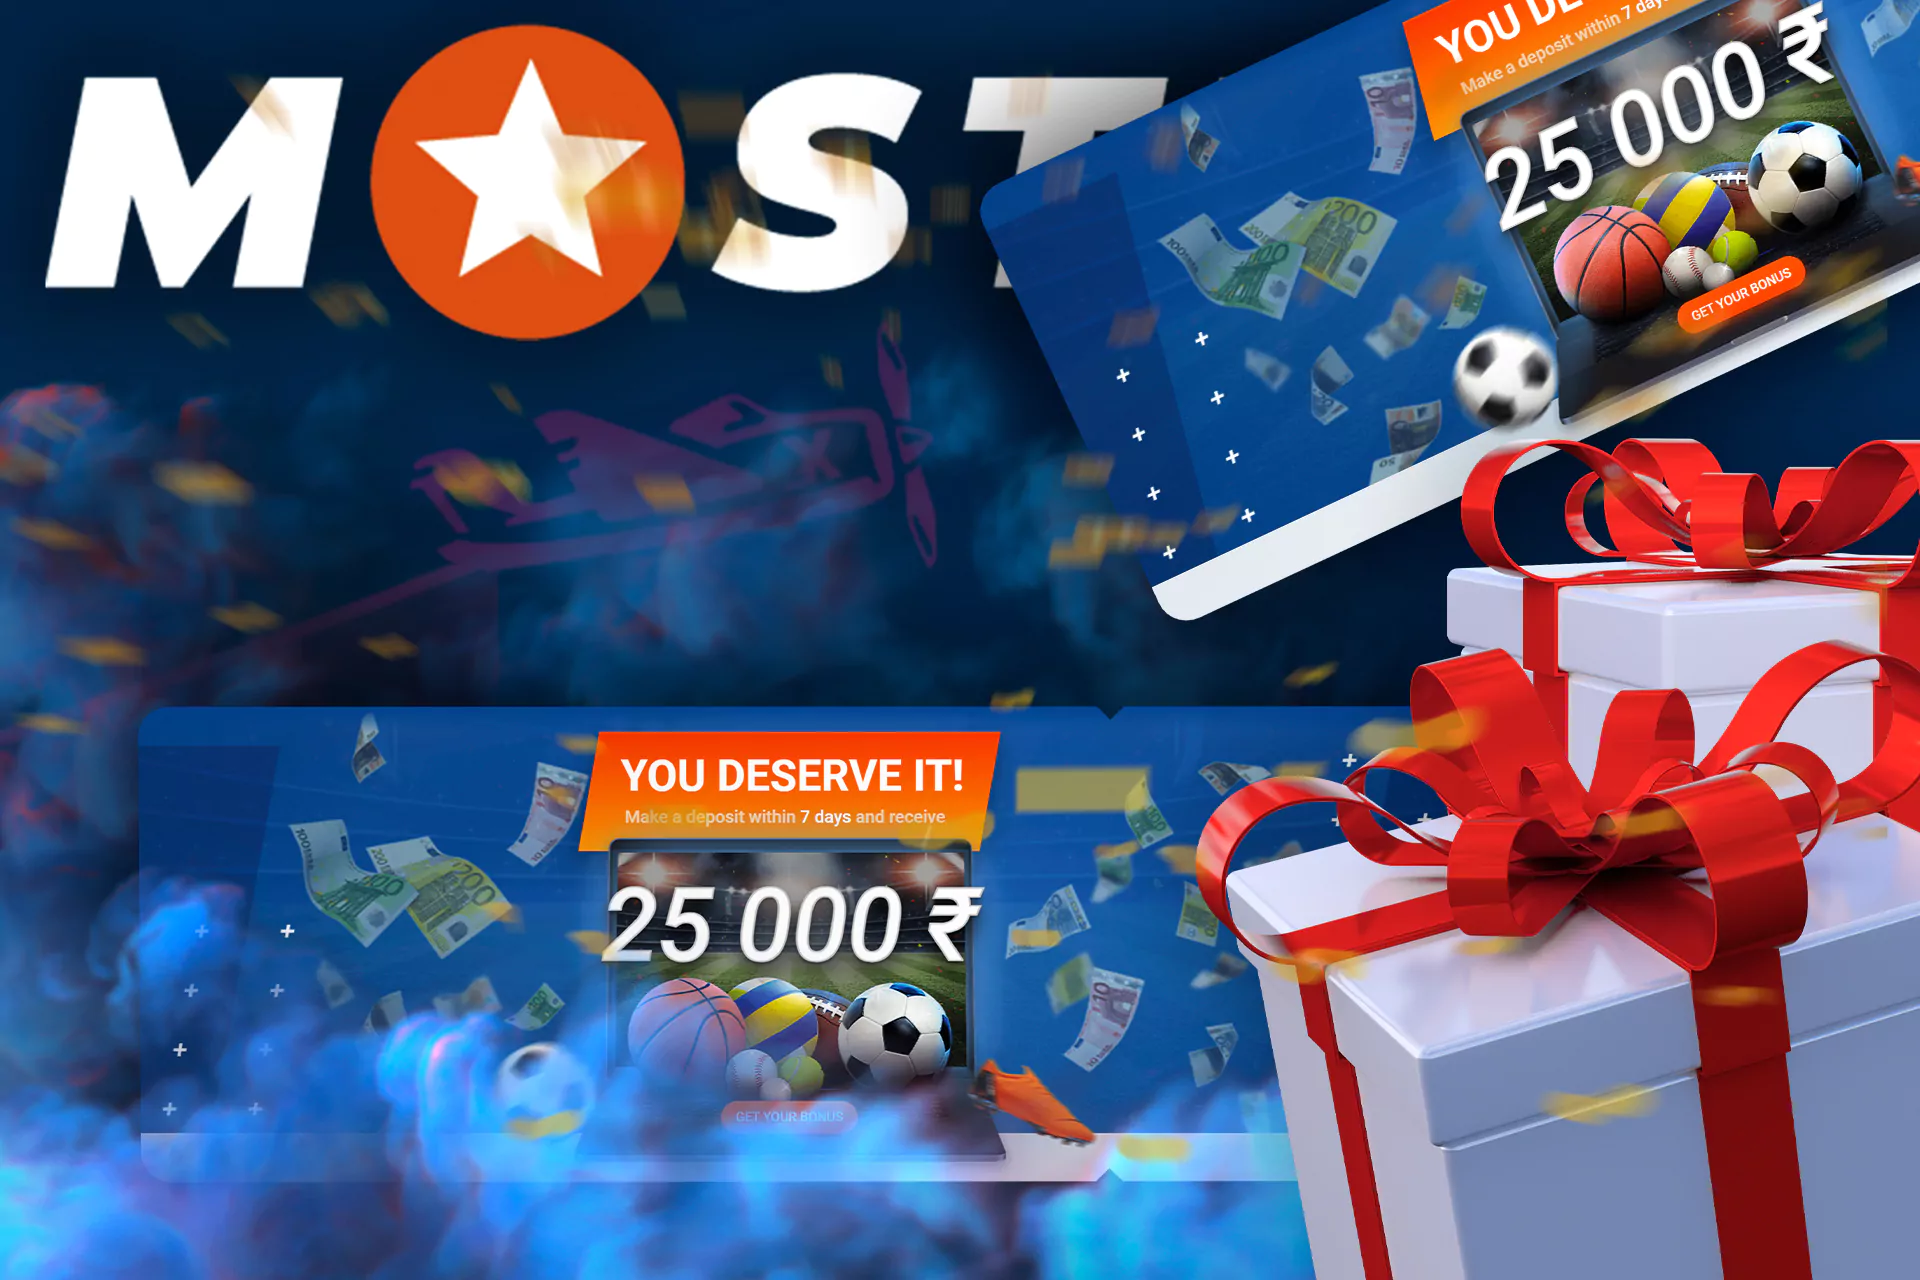 If you are a newcomer at Mostbet, you can count on the welcome bonus on your first deposit.